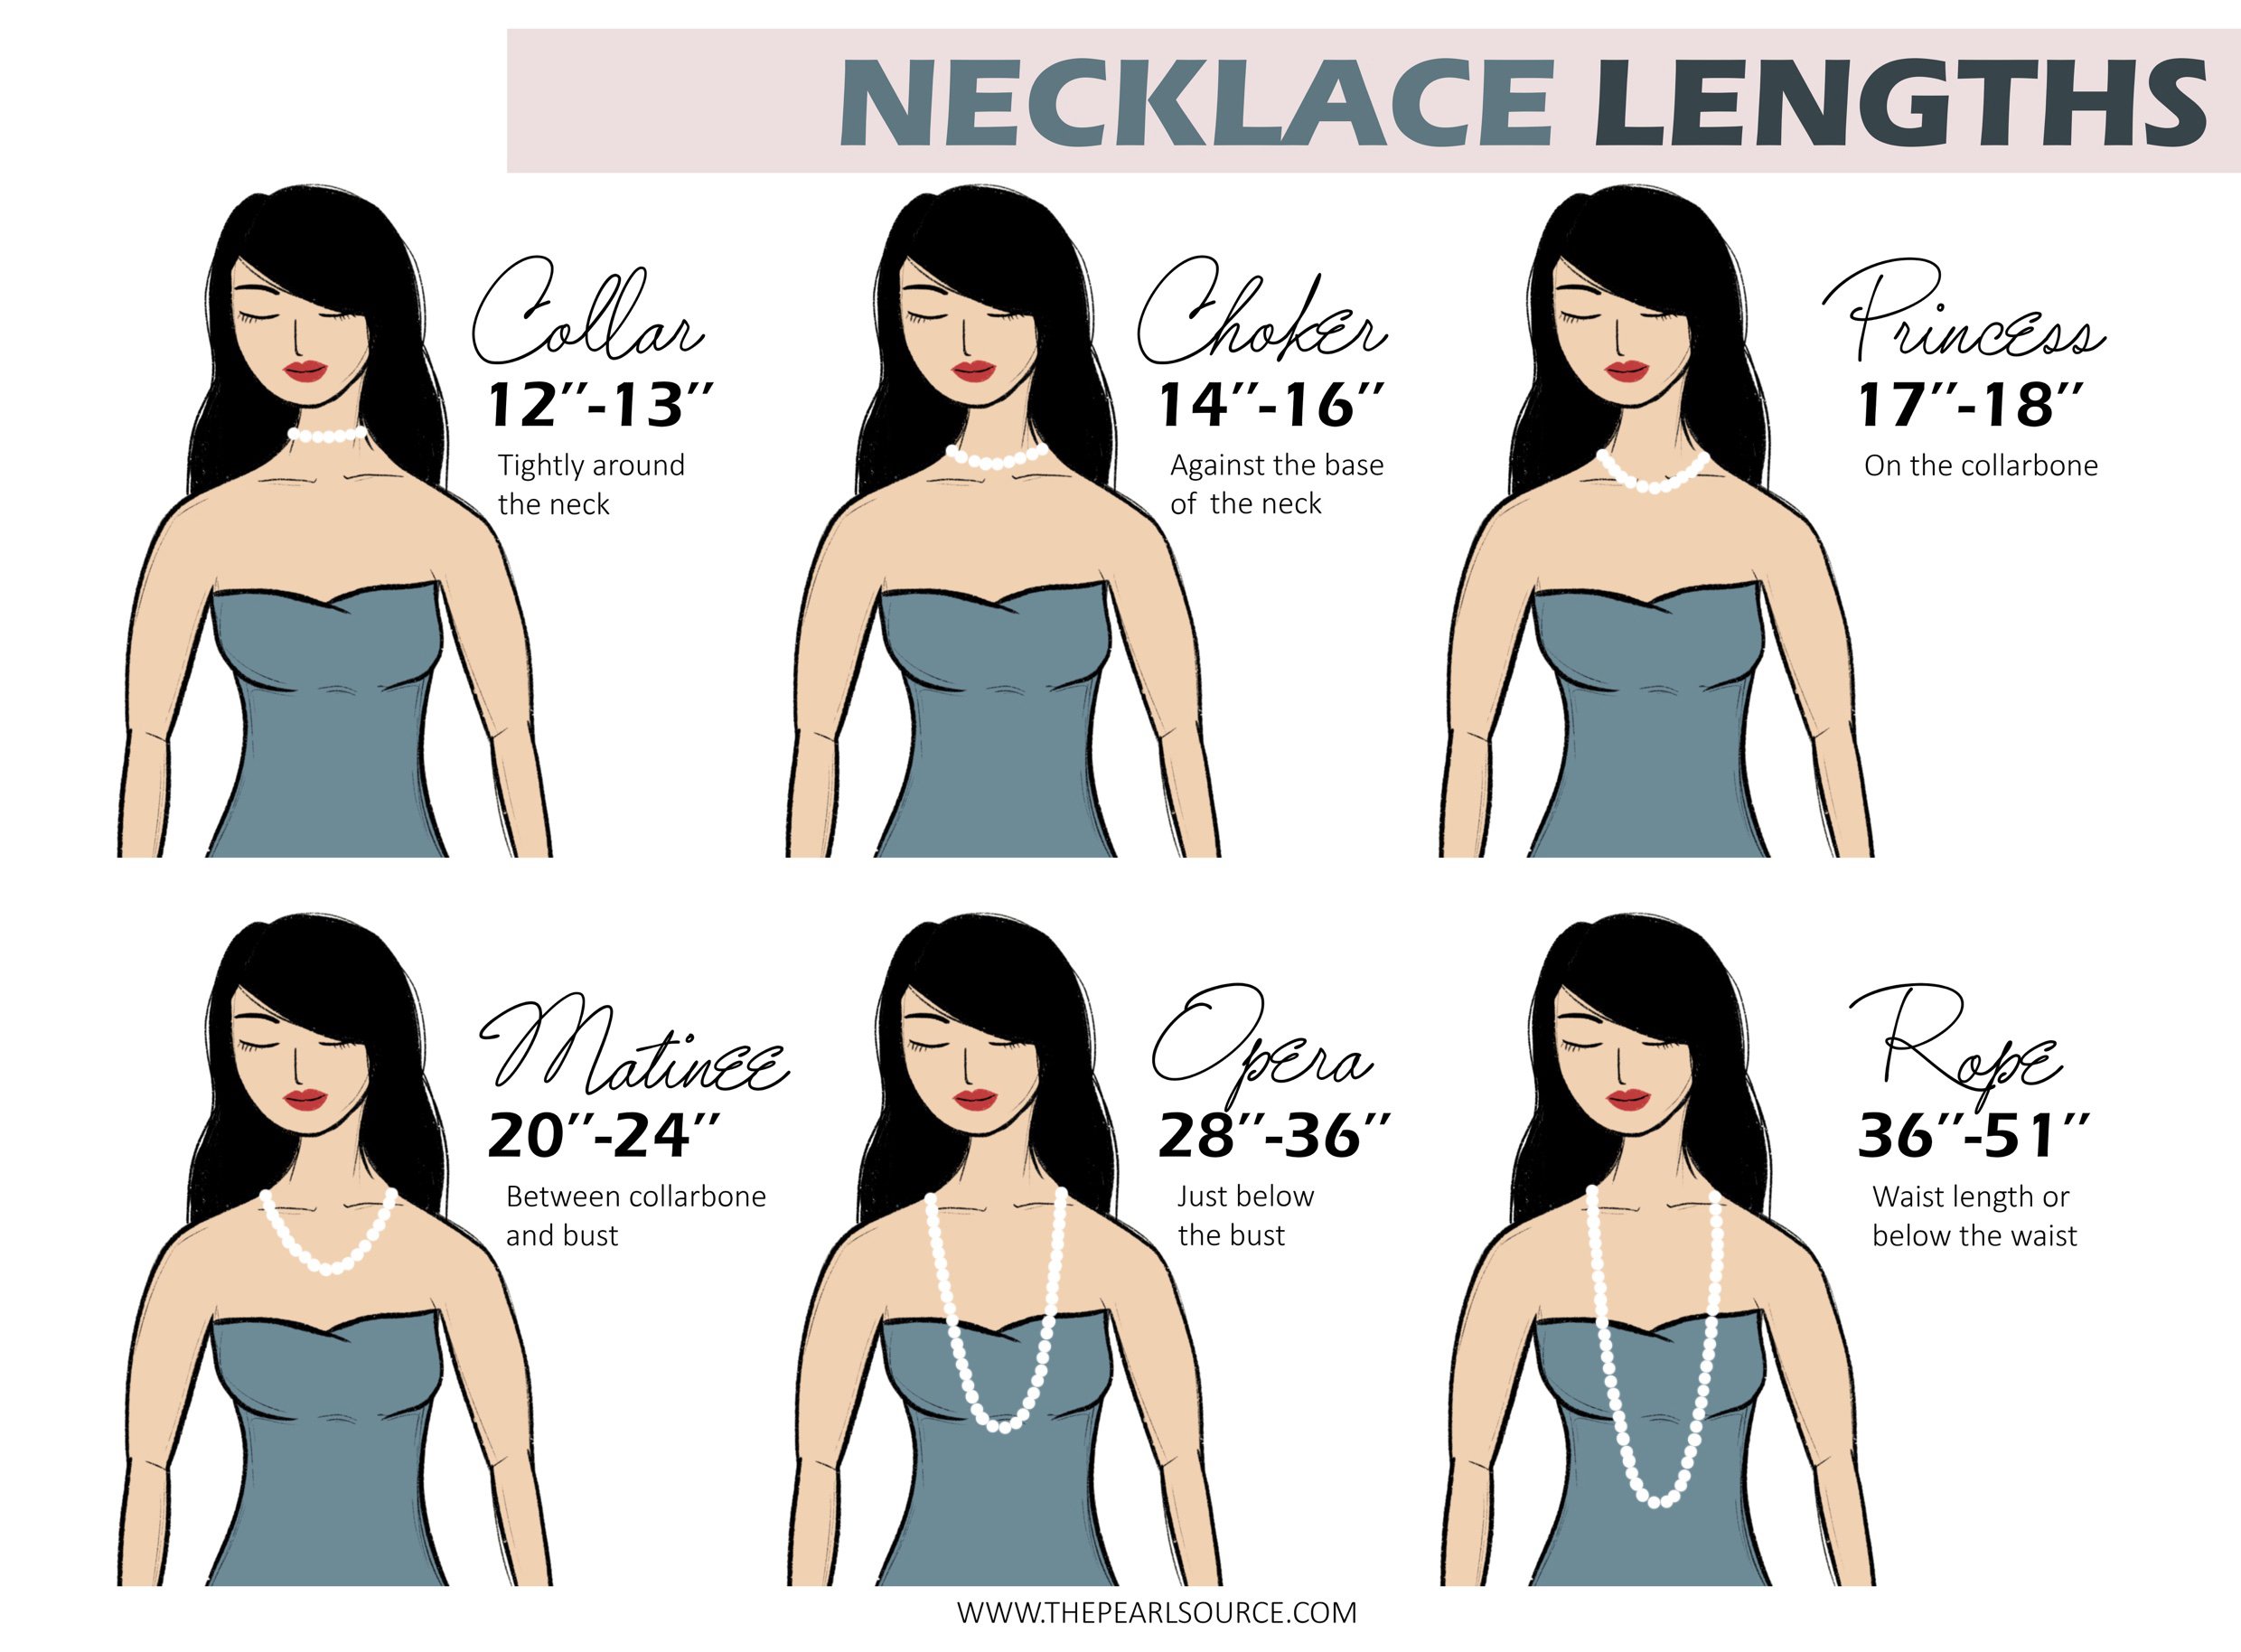 Top 5 Cute Necklaces For Women, Women's Fashion Guide